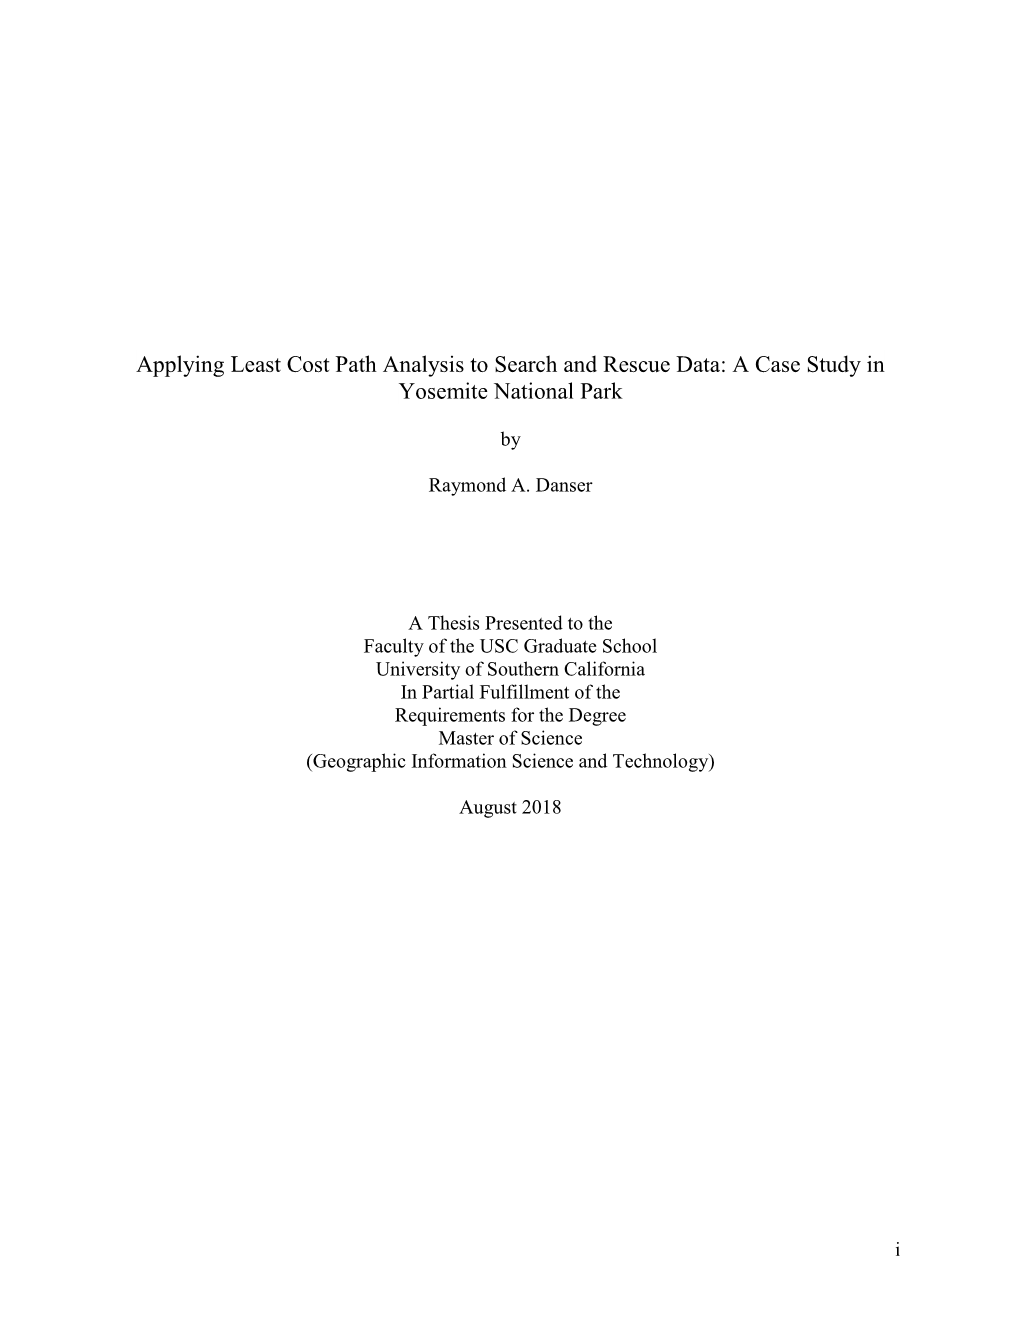 Applying Least Cost Path Analysis to Search and Rescue Data: a Case Study in Yosemite National Park